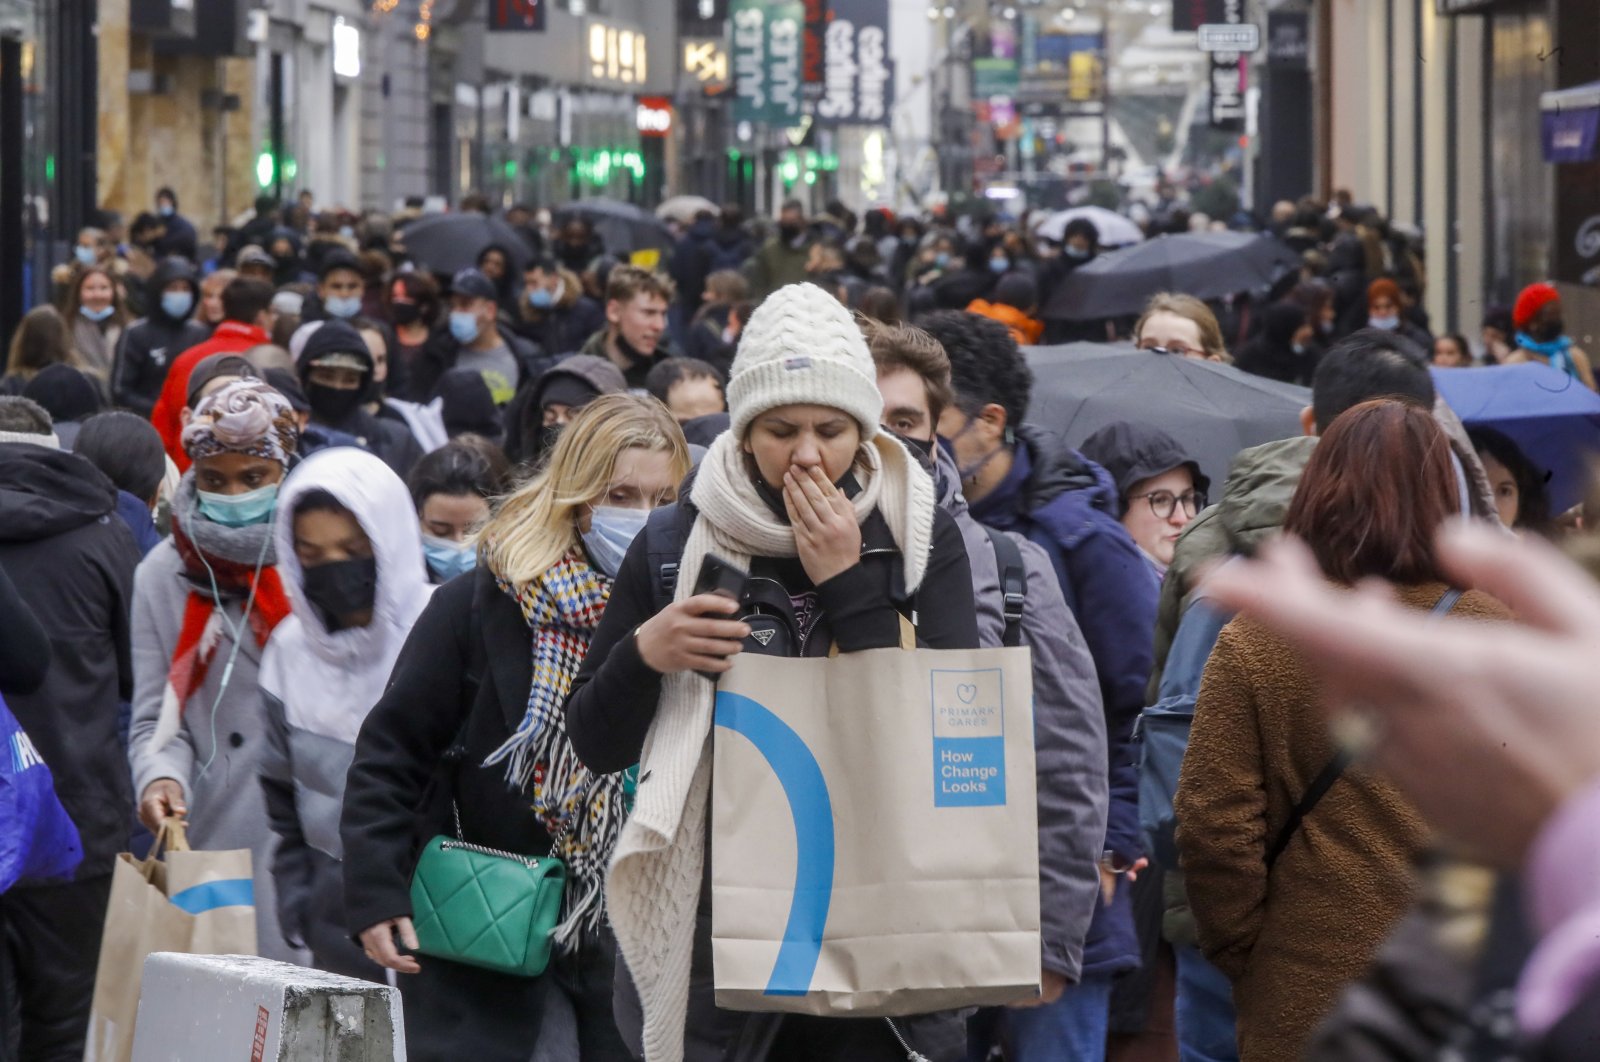 Shoppers are seen on the main shopping street of Brussels, Belgium, Jan. 3, 2021. (EPA Photo)